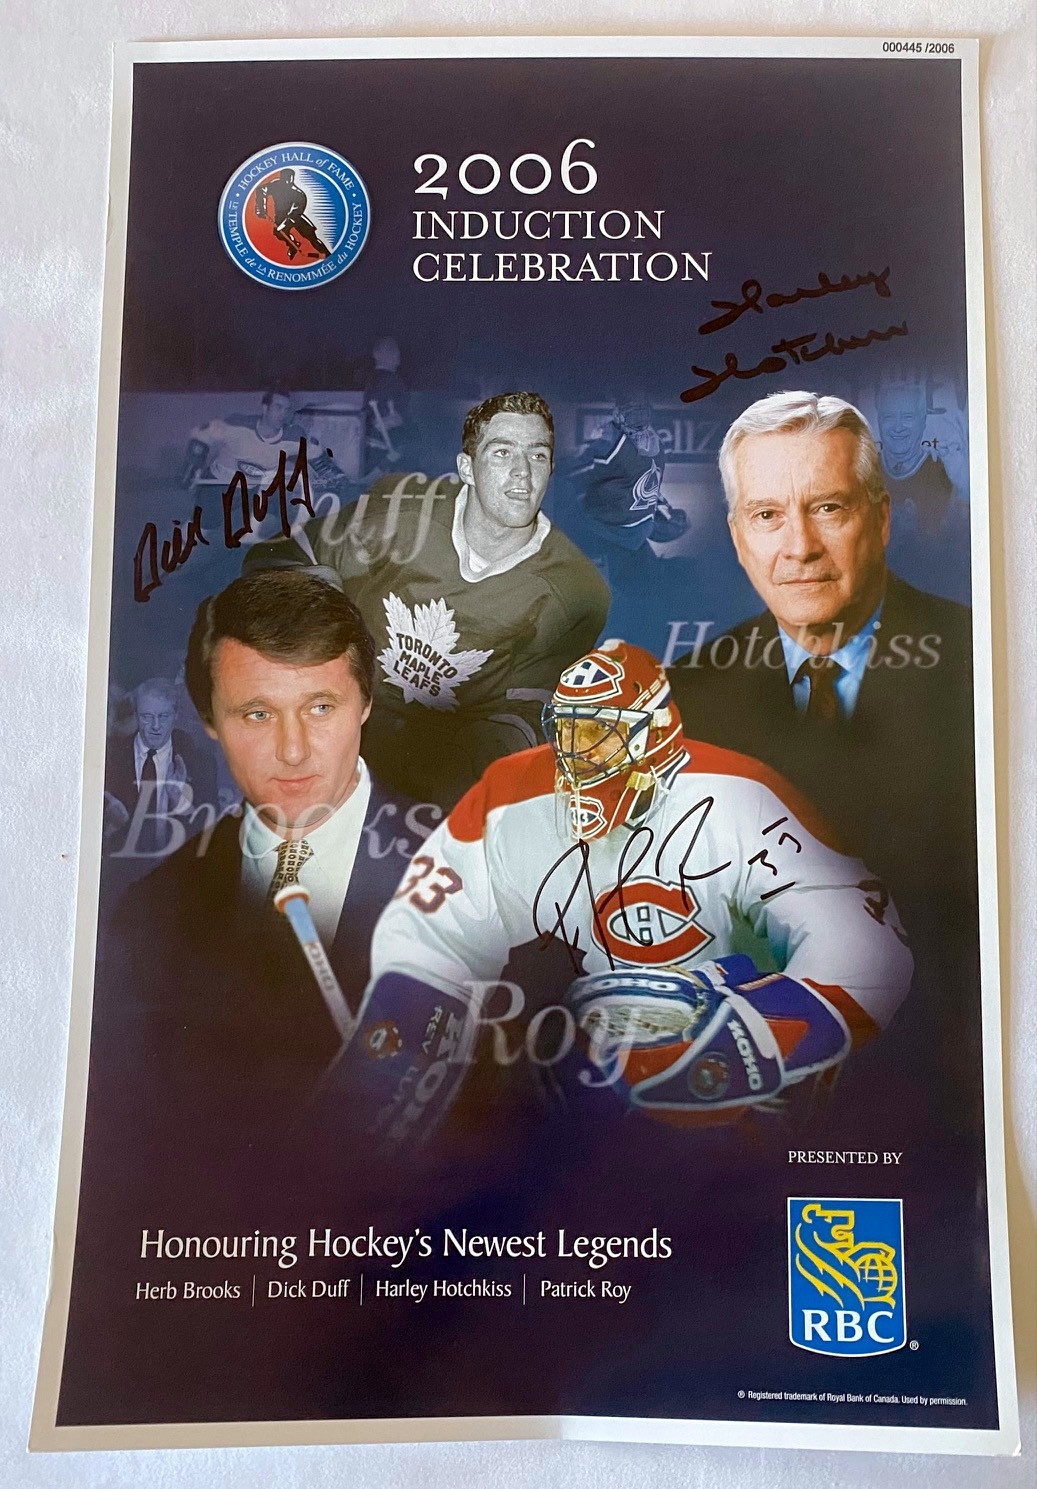 Autographed 2006 Hockey Hall of Fame Induction 11x17 Poster with Patrick Roy